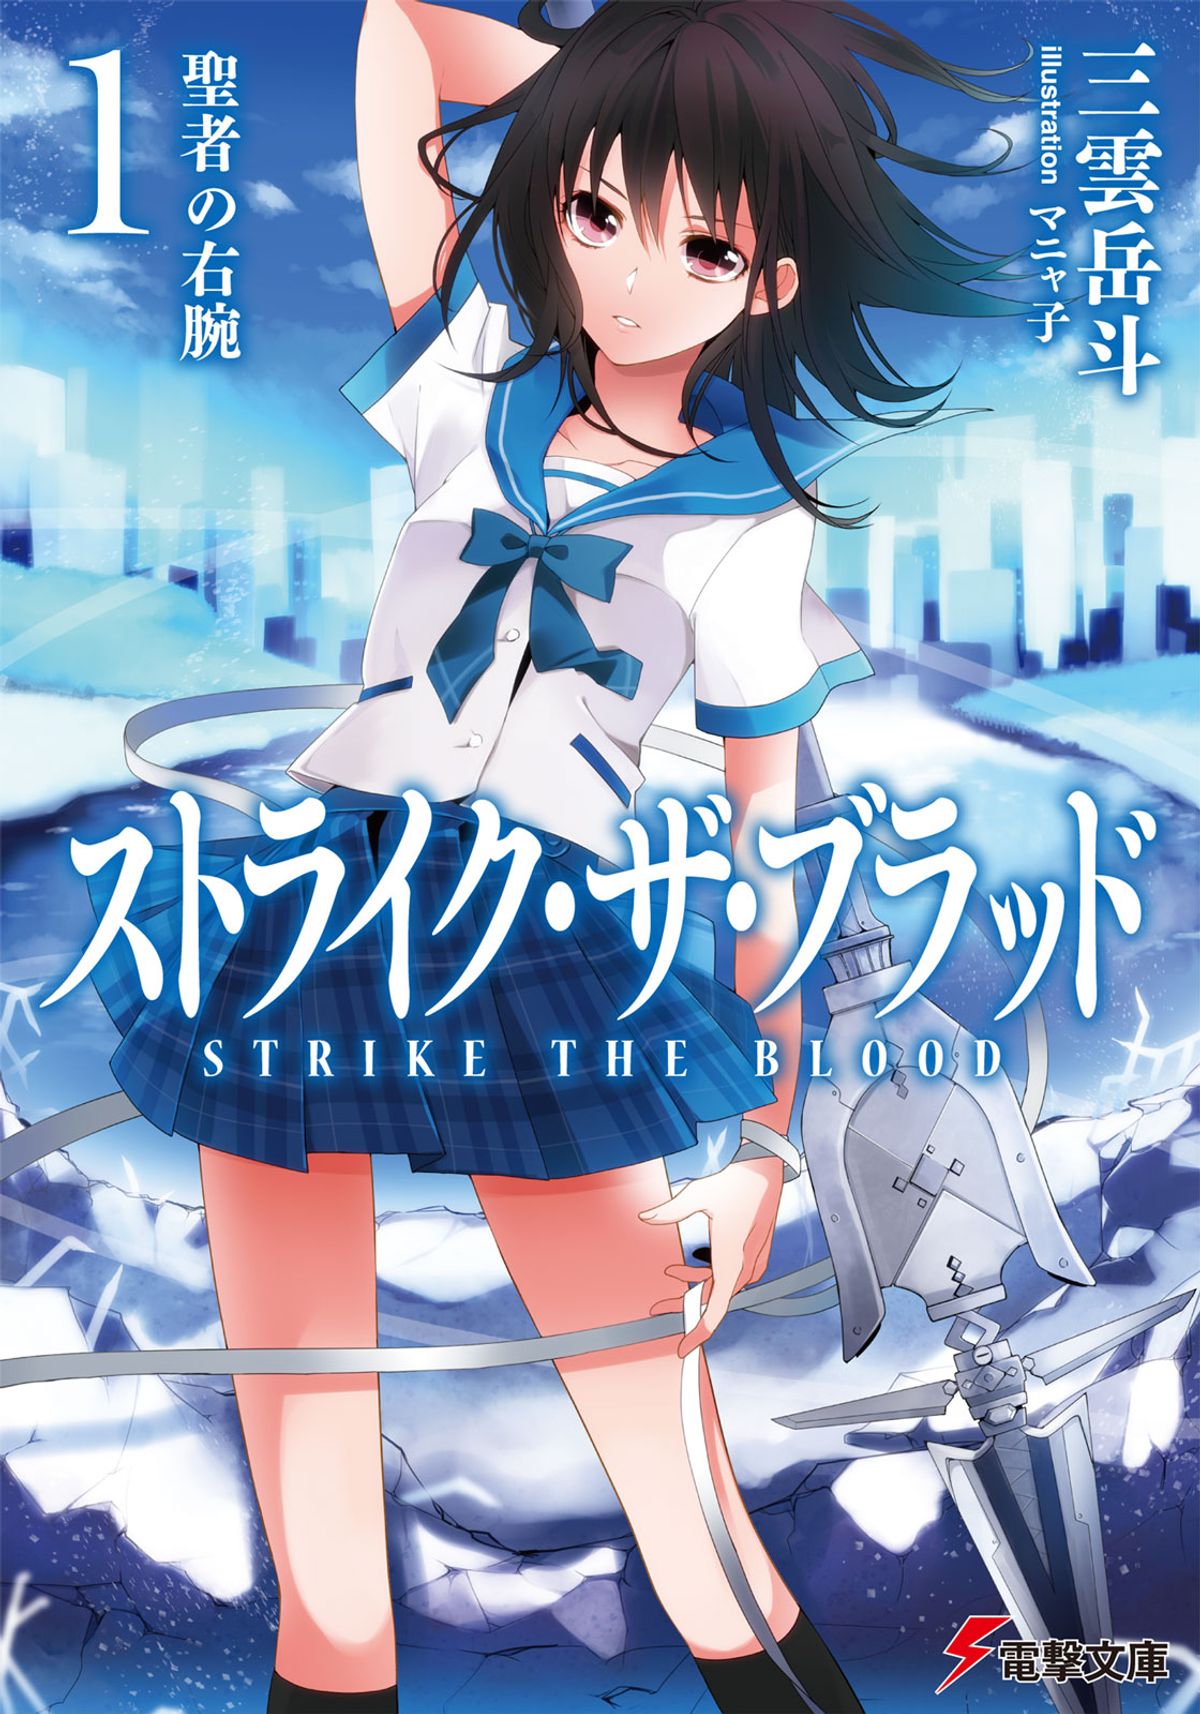 Strike the Blood Download Complete